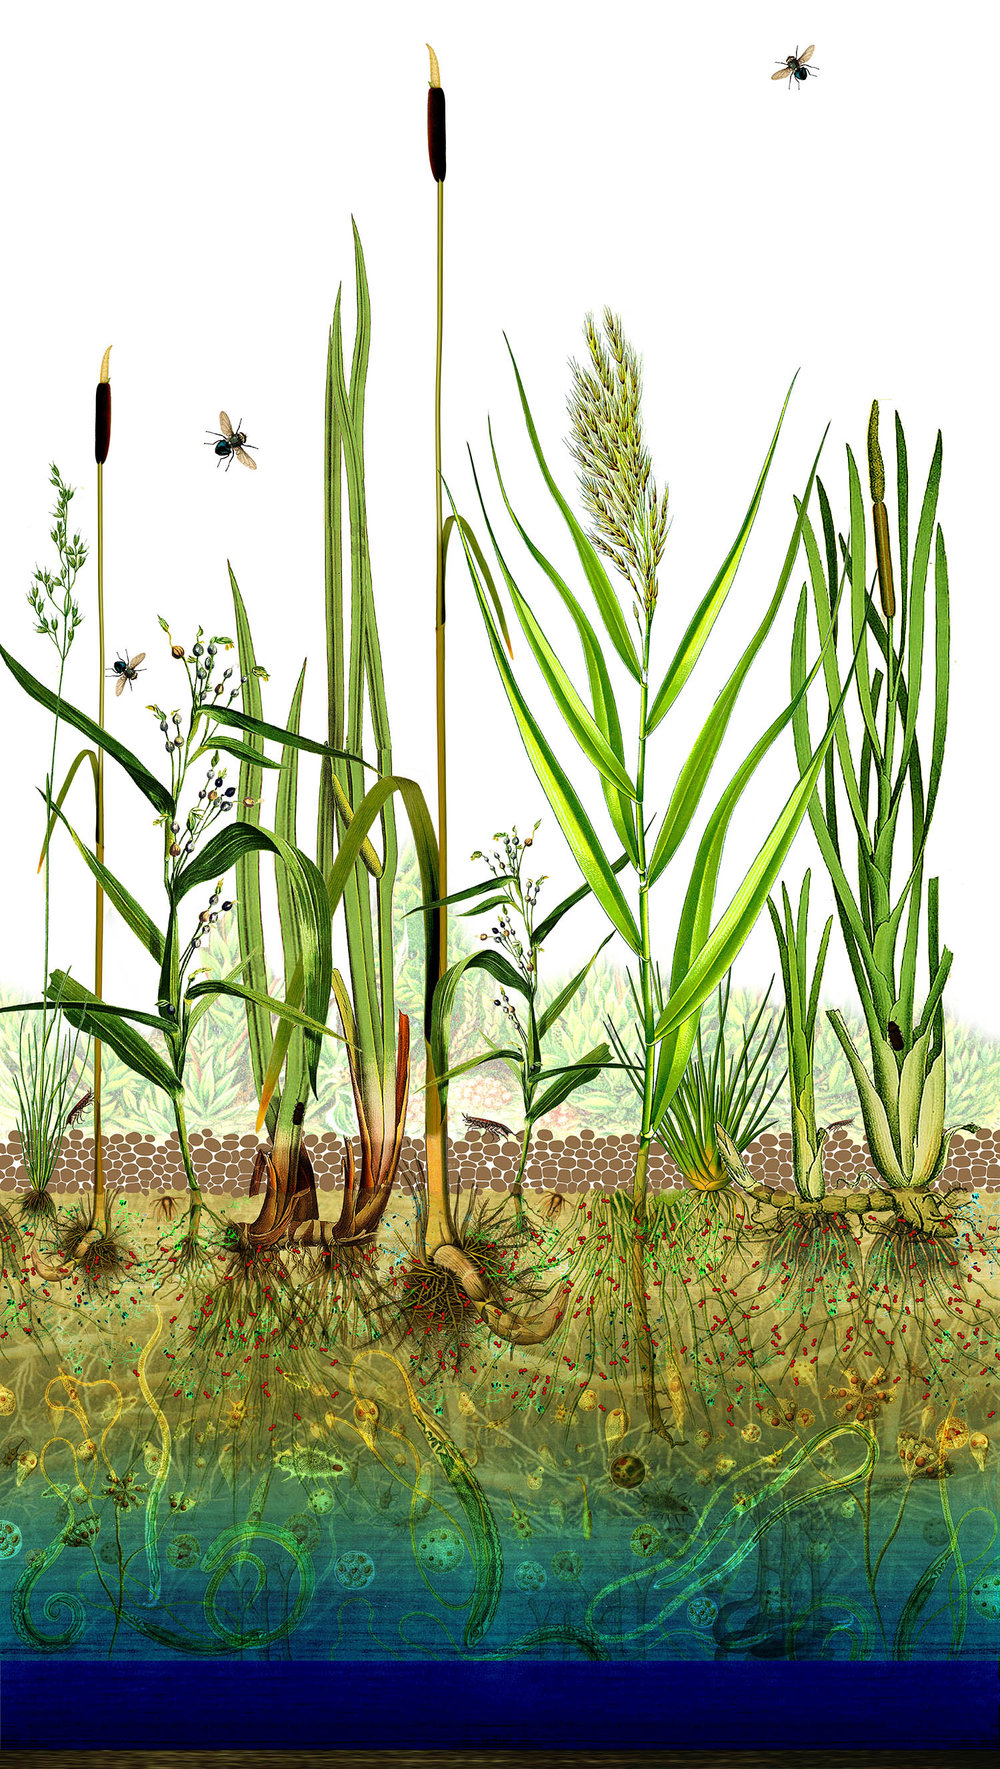 WHAT ARE CONSTRUCTED WETLANDS?